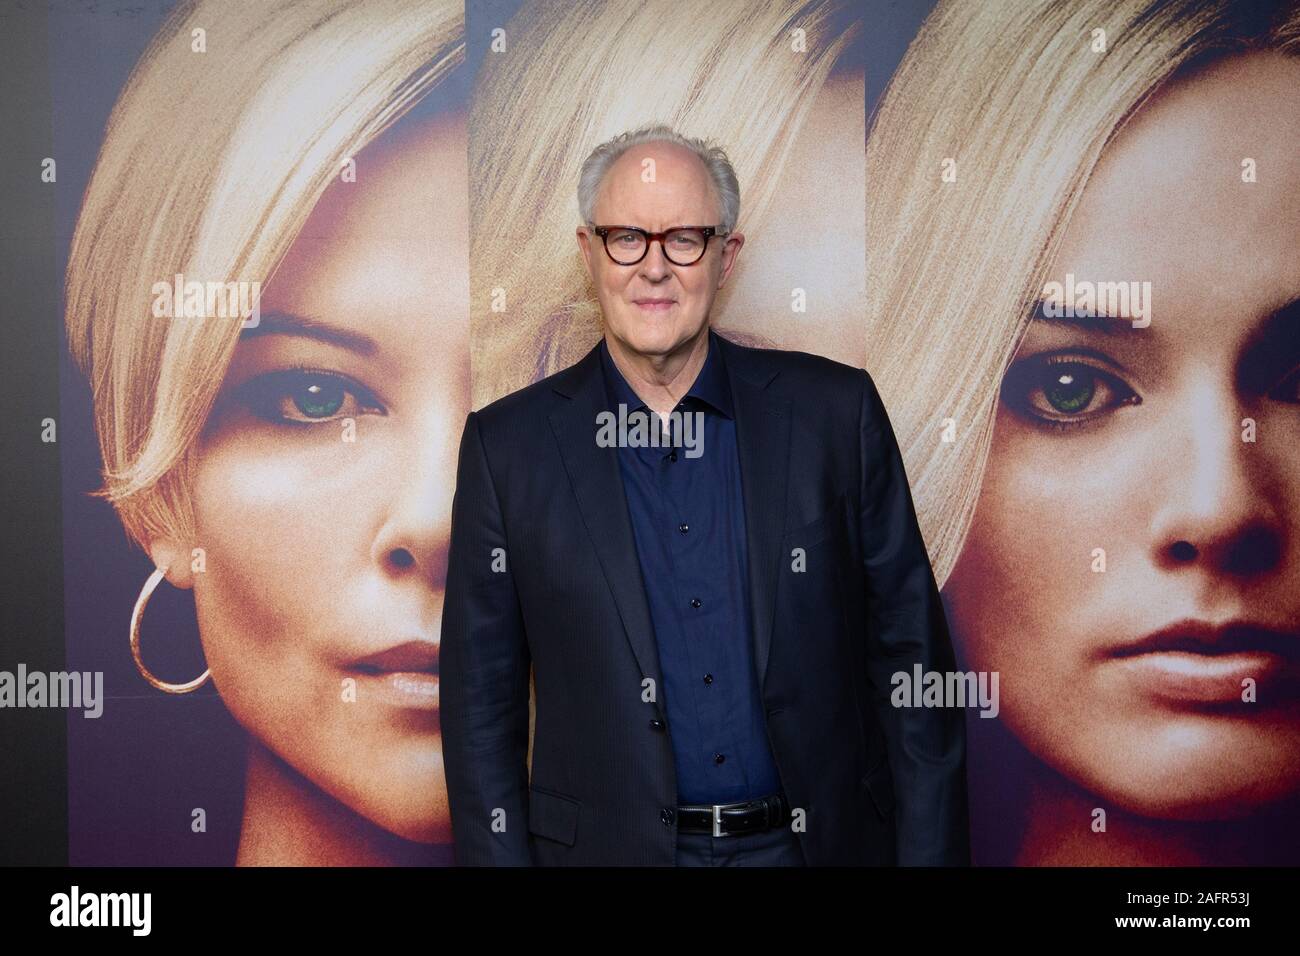 New York, United States. 16th Dec, 2019. John Lithgow arrives on the red carpet at the special screening of Bombshell at Jazz at Lincoln Center's Frederick P. Rose Hall on Monday, December 16, 2019 in New York City. Photo by Serena Xu-Ning Carr/UPI Credit: UPI/Alamy Live News Stock Photo